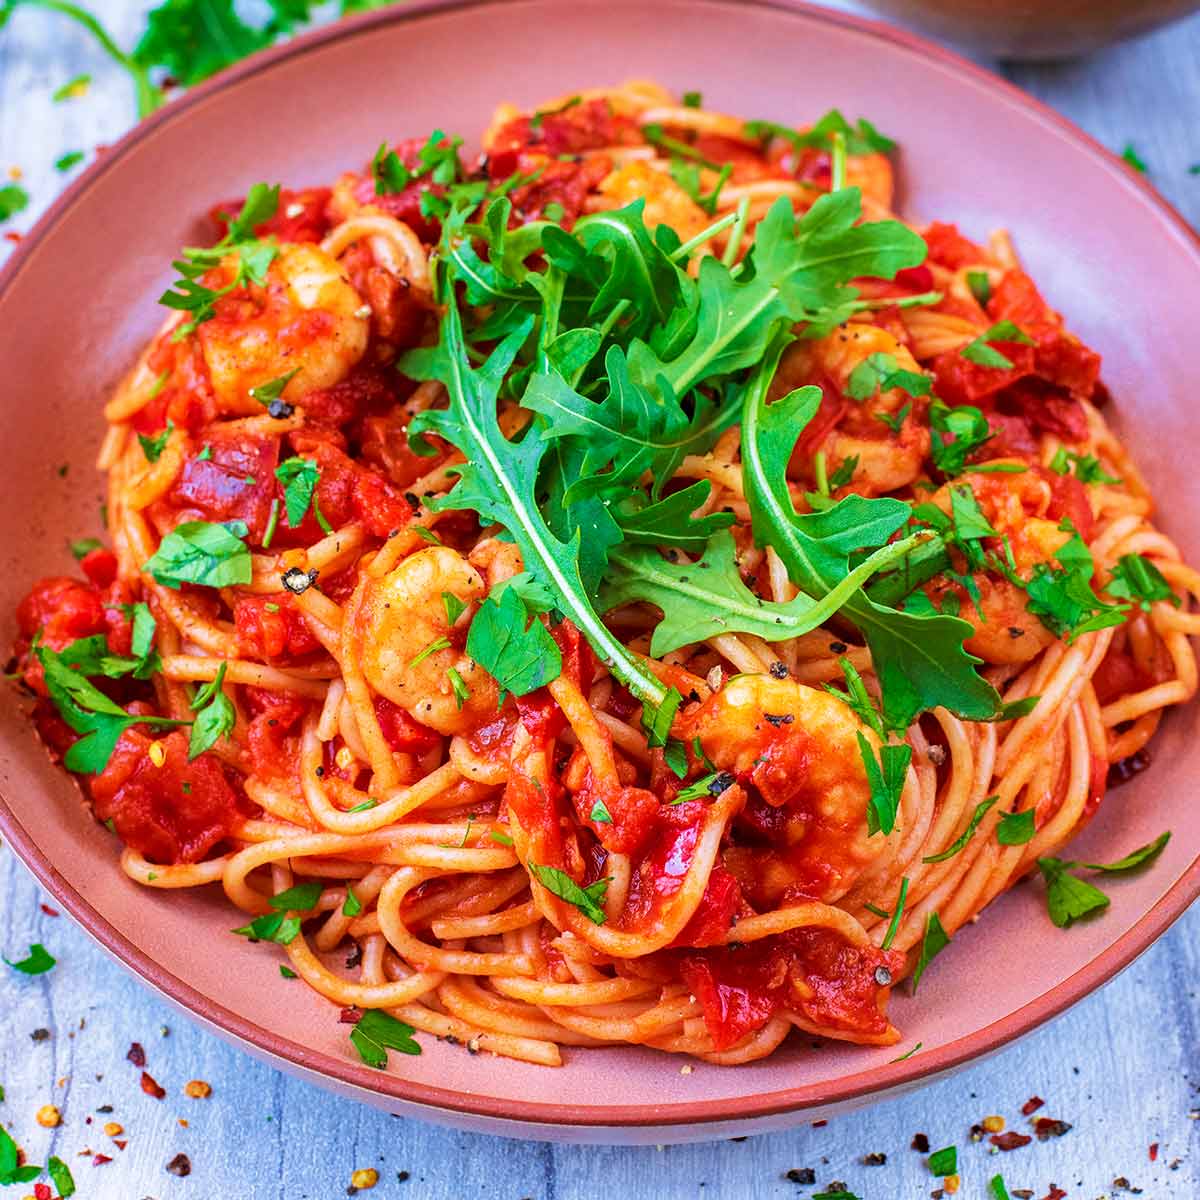 Prawn and Chorizo Pasta in a bowl with rocket lettuce leaves on top.